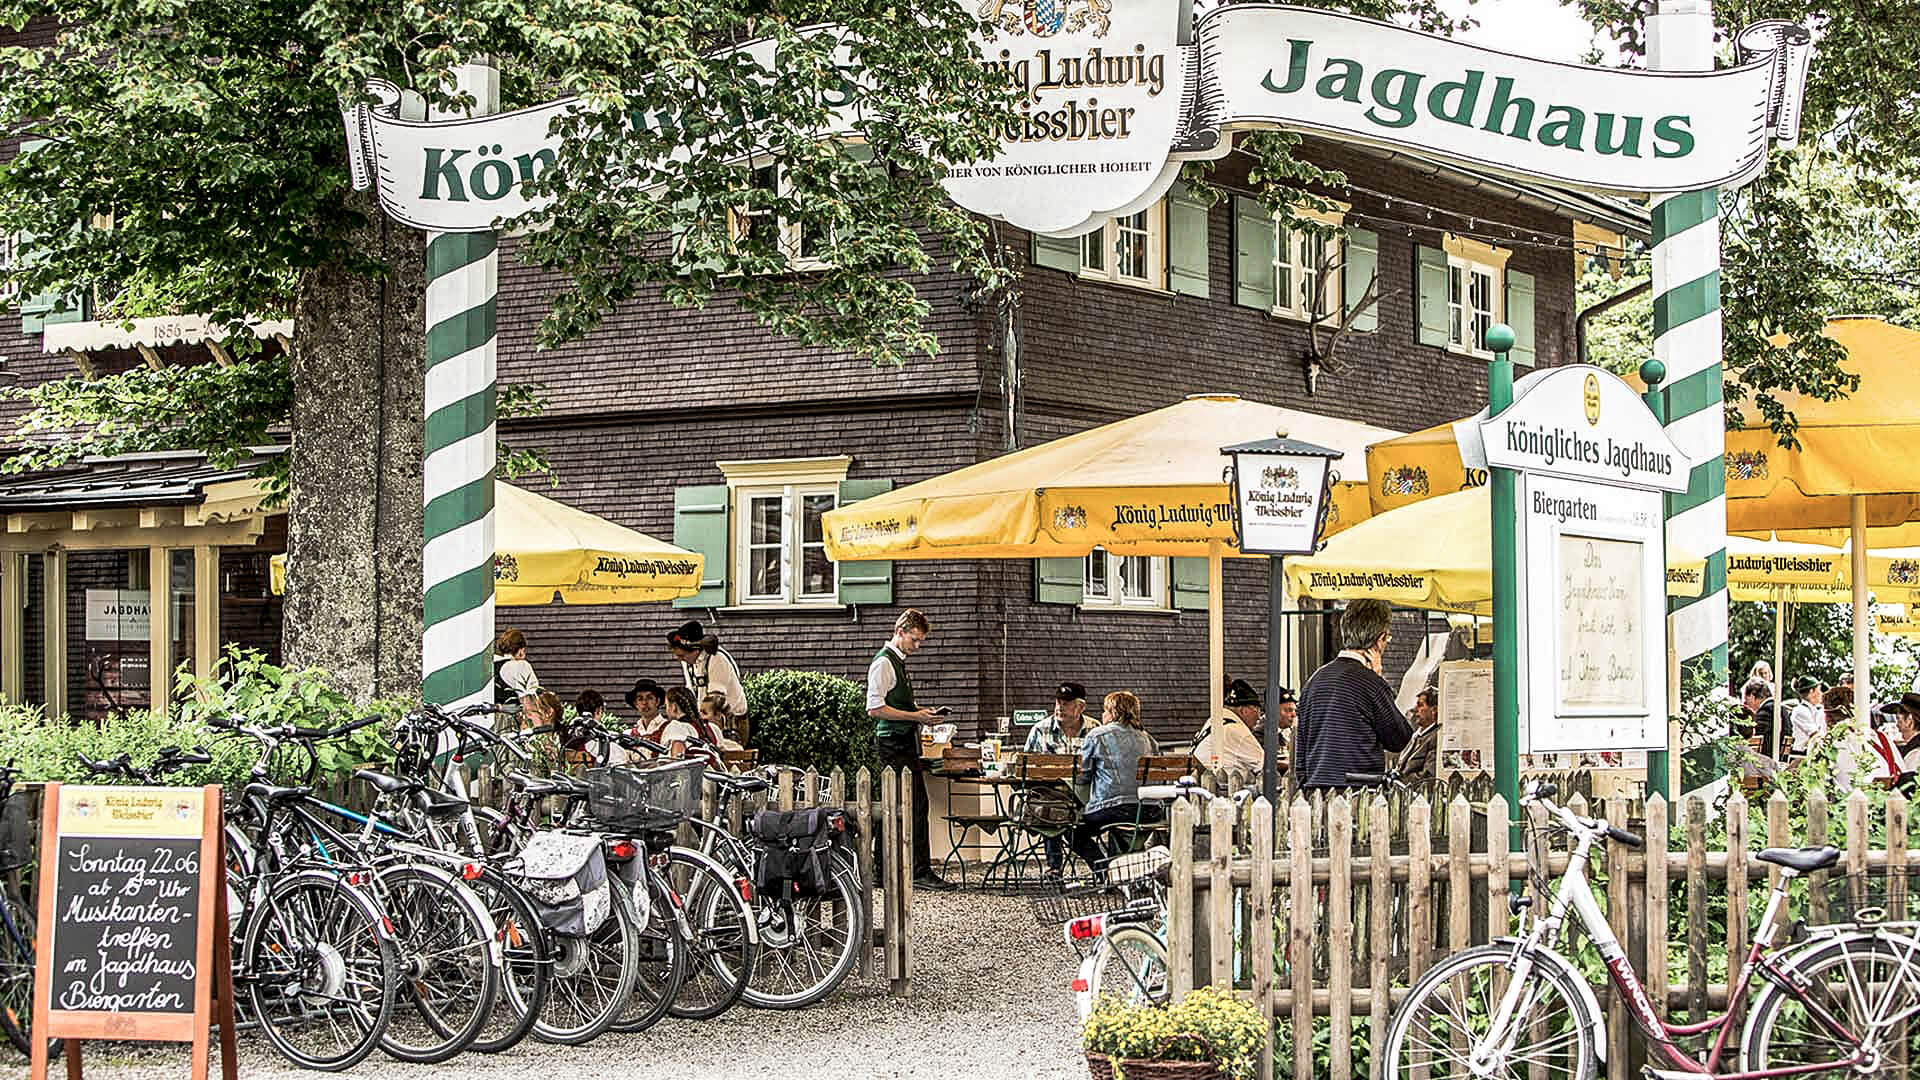 In the royal Jagdhaus in Oberstdorf, only upscale inn cuisine is on the menu